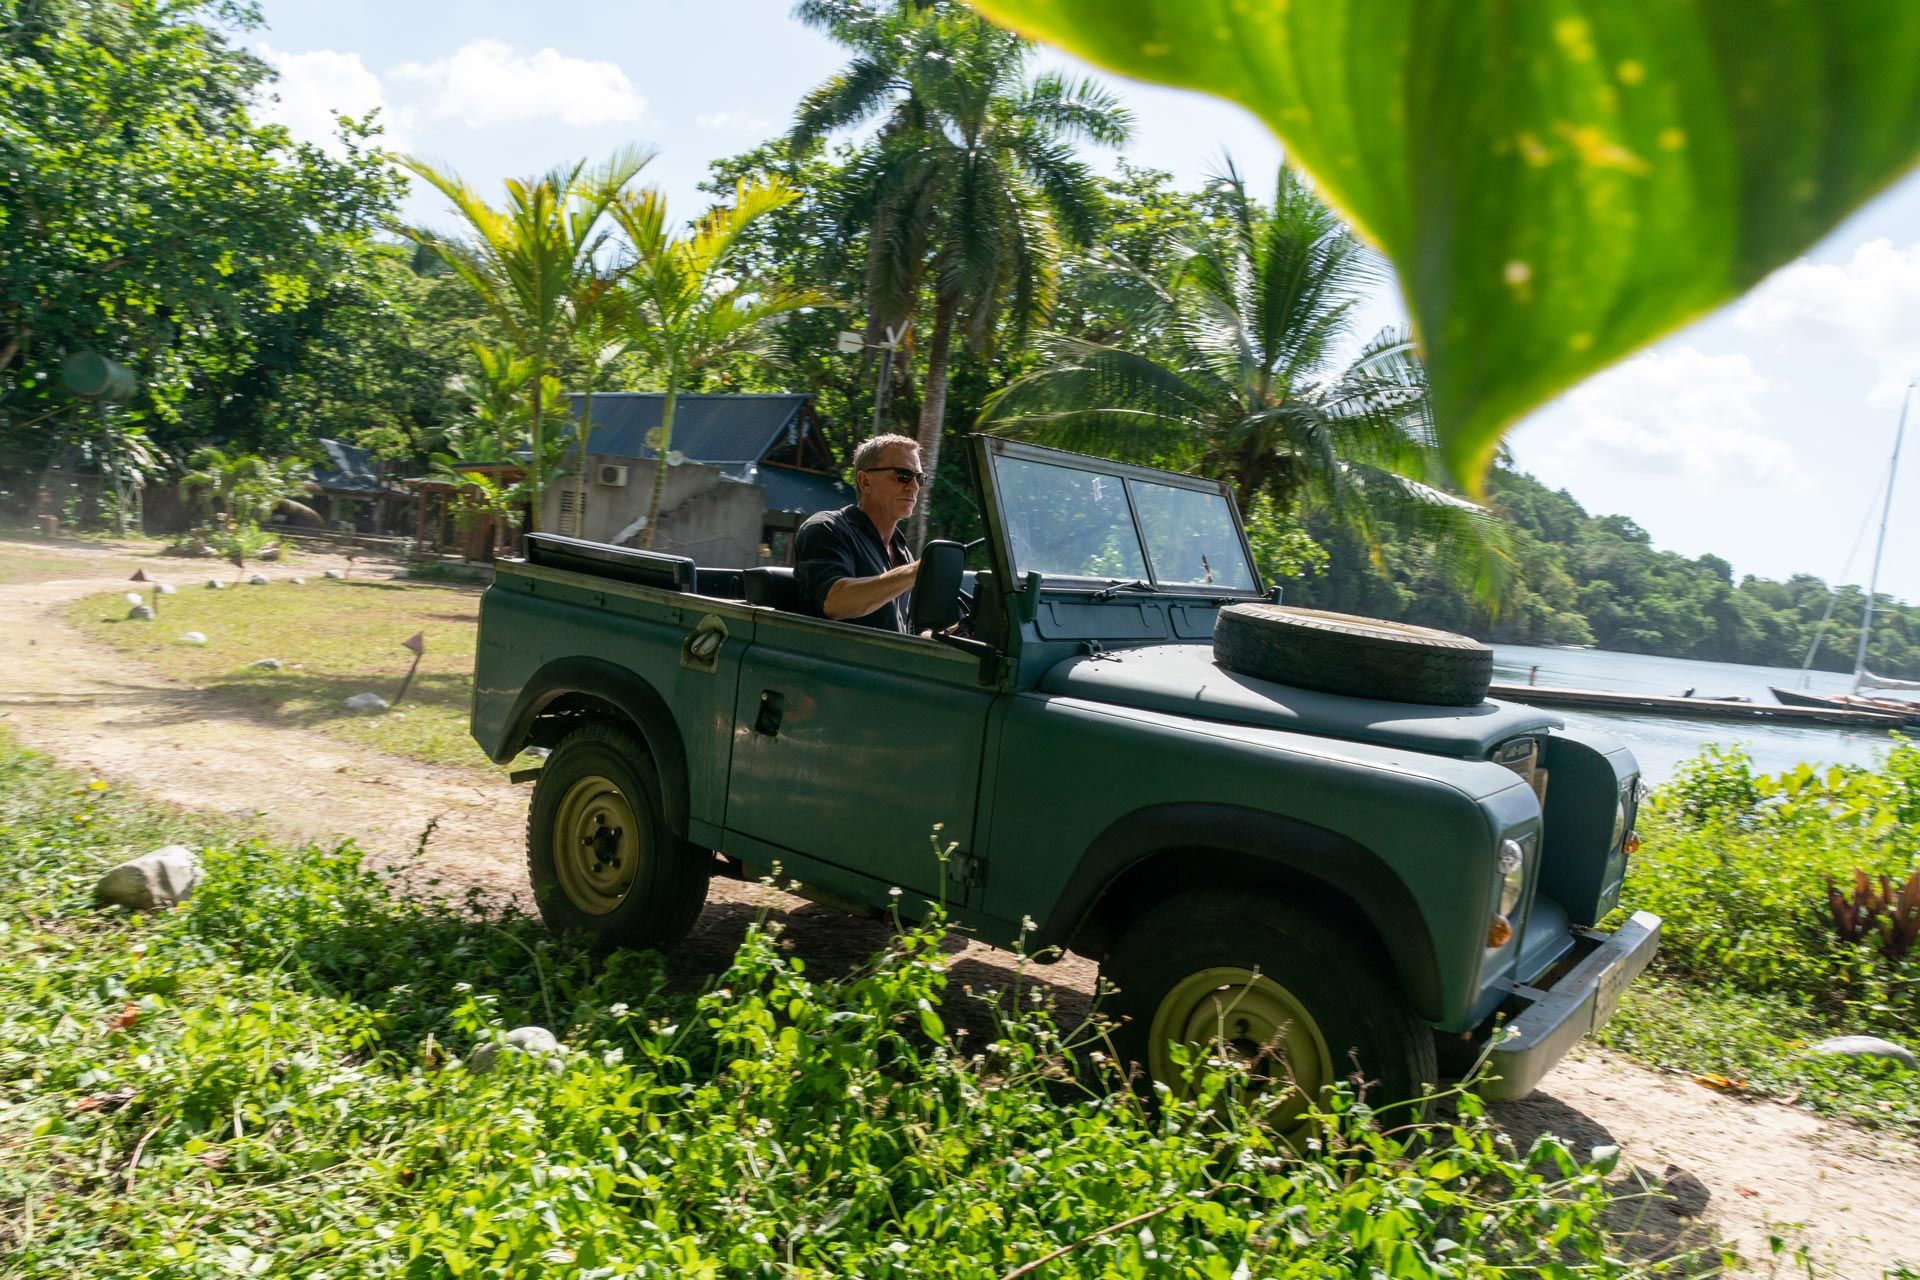 James Bond retires to Jamaica where he drives this Series 3 Land Rover Defender